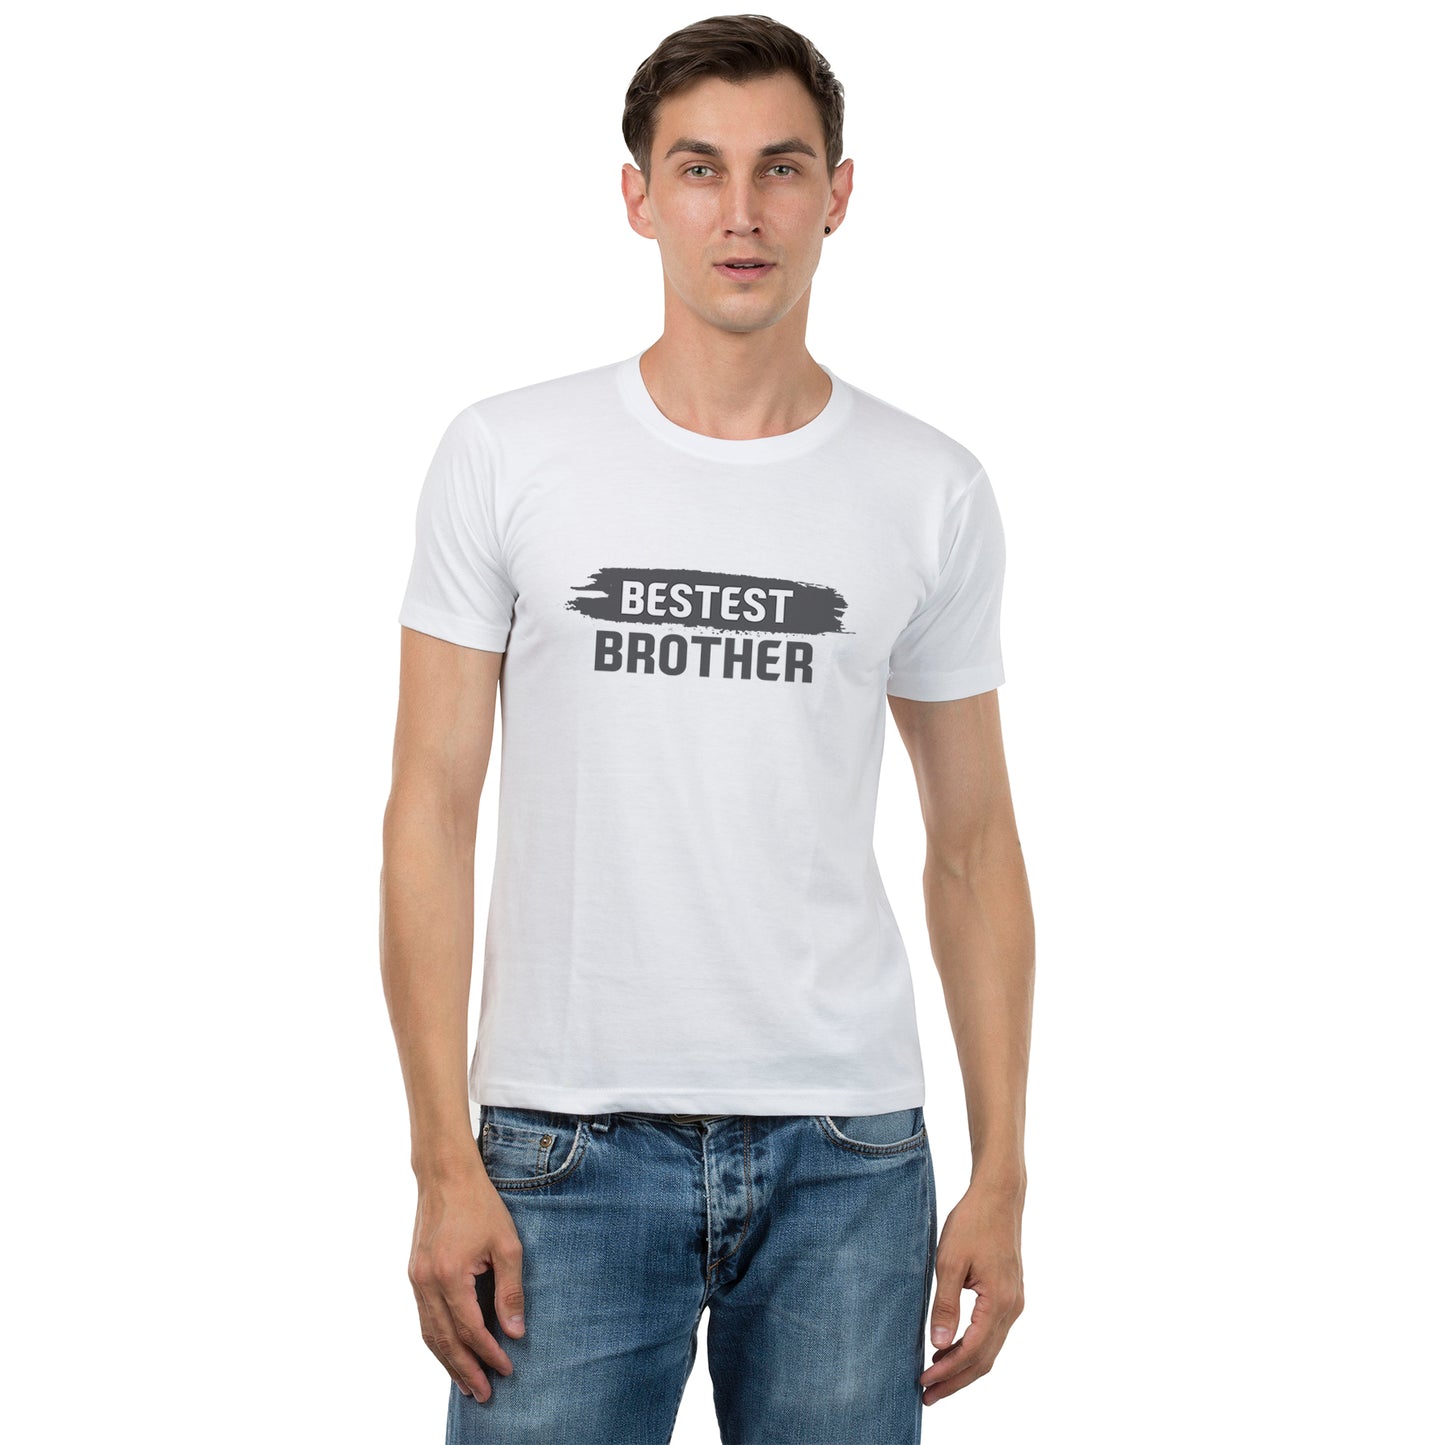 Bestest Sister- Bestest Brother matching Sibling t shirts - white